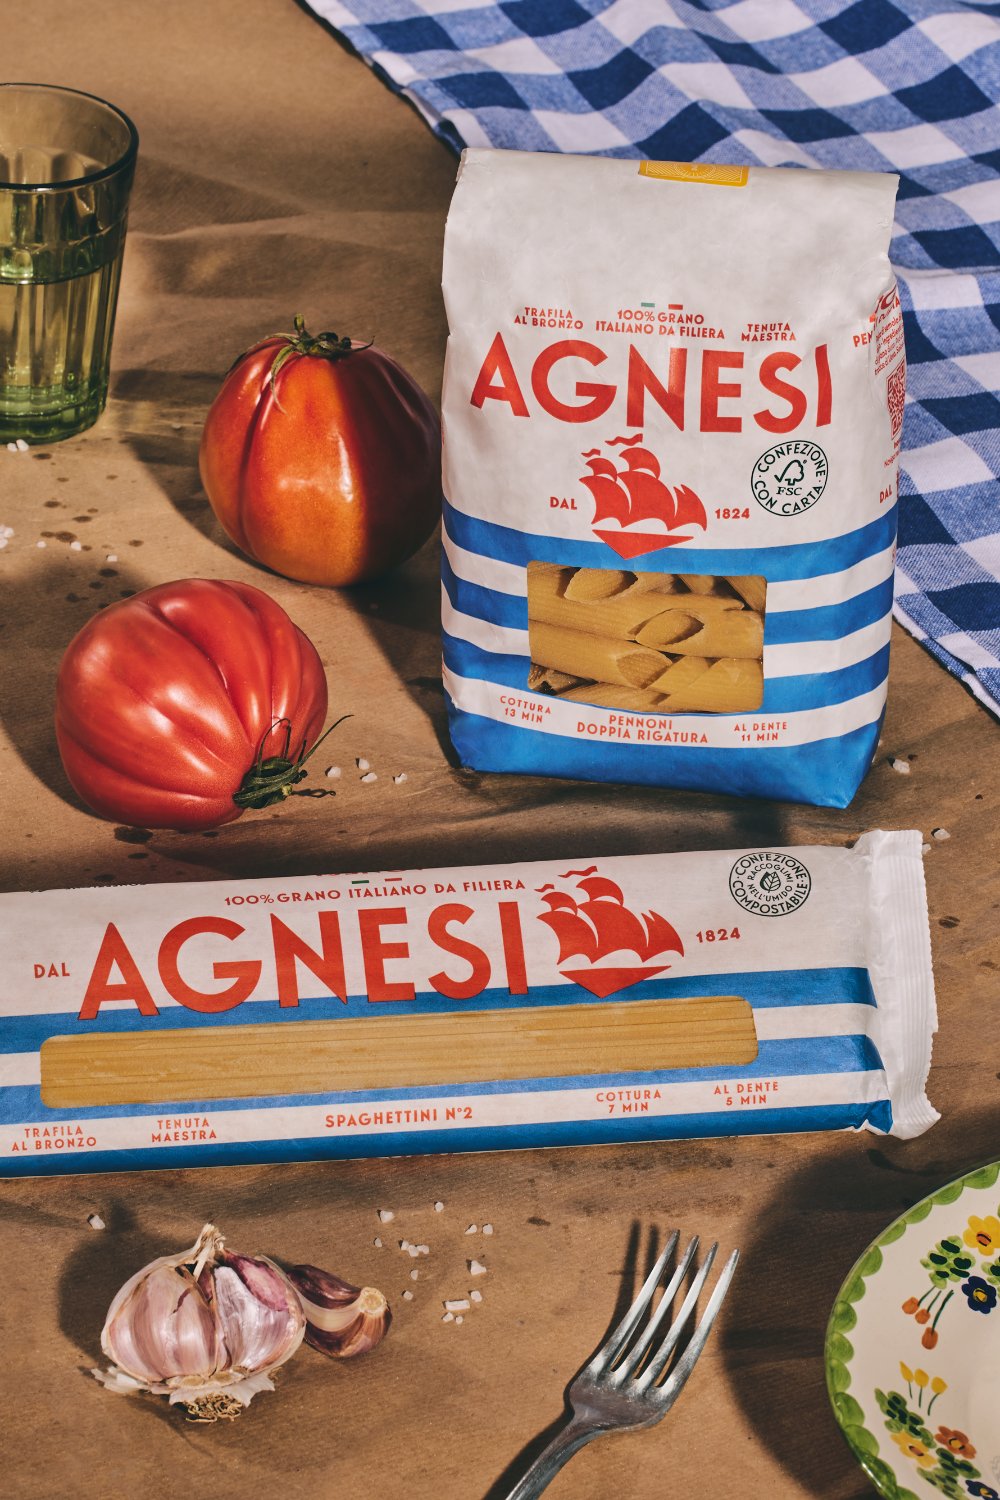 Agnesi Pasta Gets a Charming Bicentennial Makeover Worthy of a Wes Anderson Movie